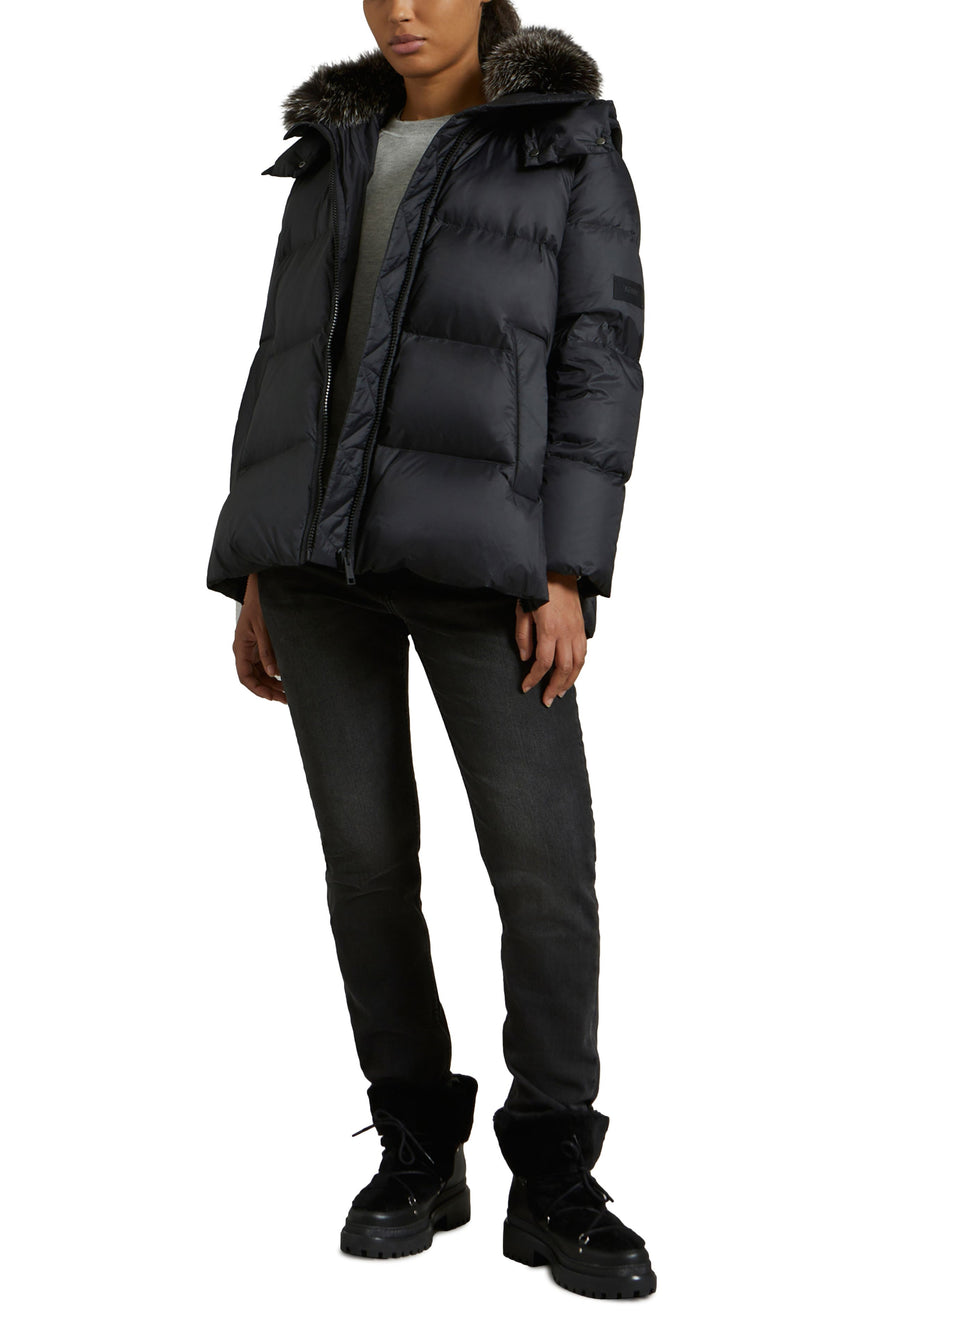 Felwors Women Down Cotton Abrigos Mujer Invierno New Hooded Warm Jacket  Female Loose Black Winter Windproof Long Coats 